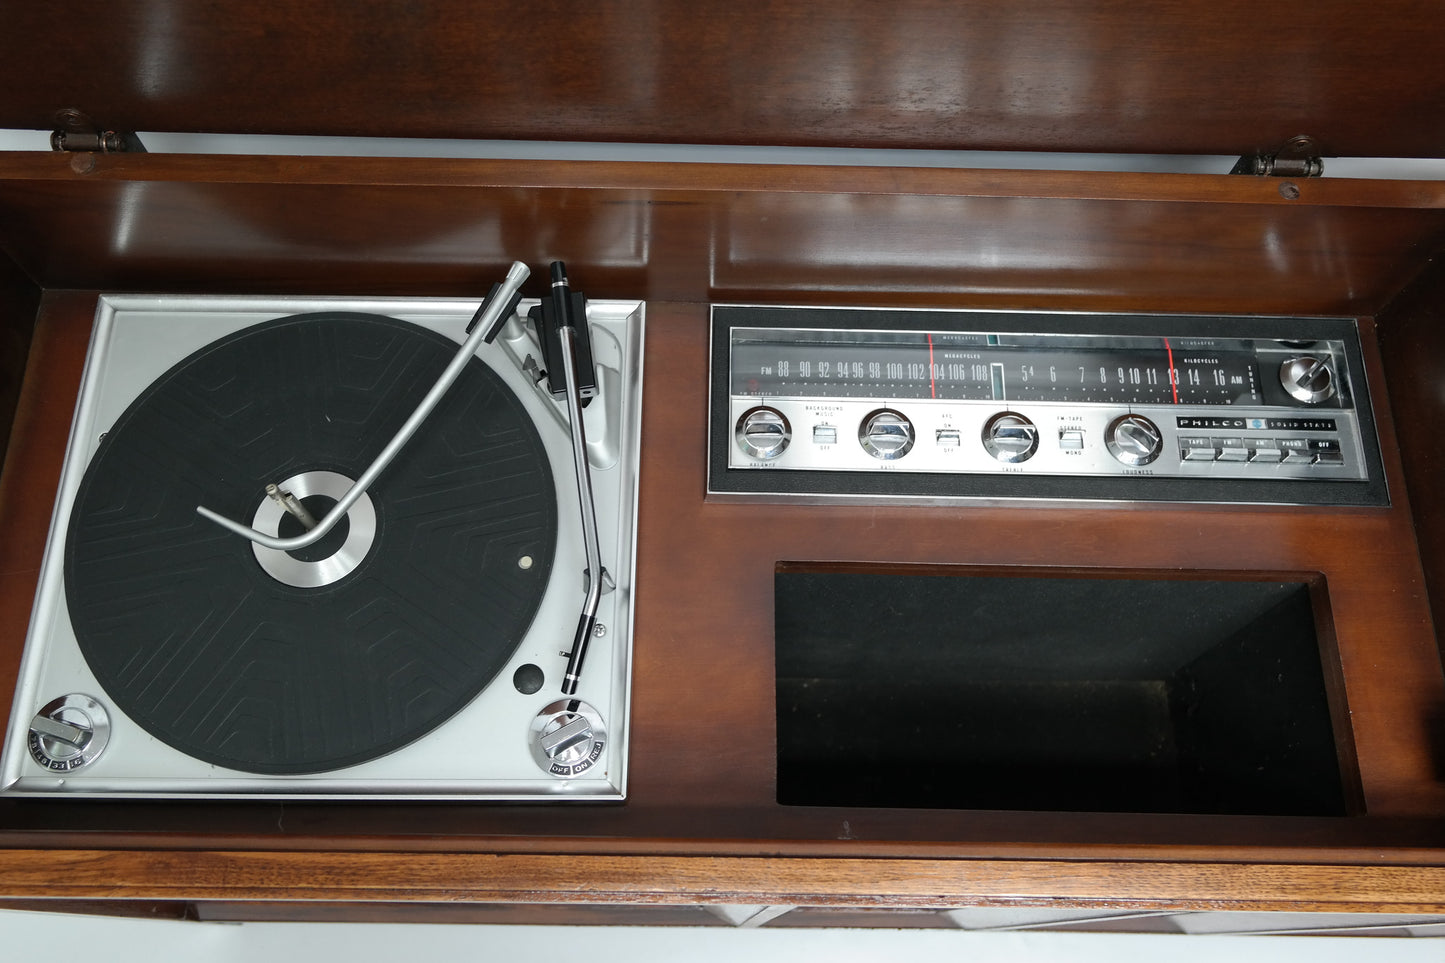 Mid Century Modern Philco Vintage Stereo Console - Record Player Changer - AM/FM Tuner - Bluetooth The Vintedge Co.